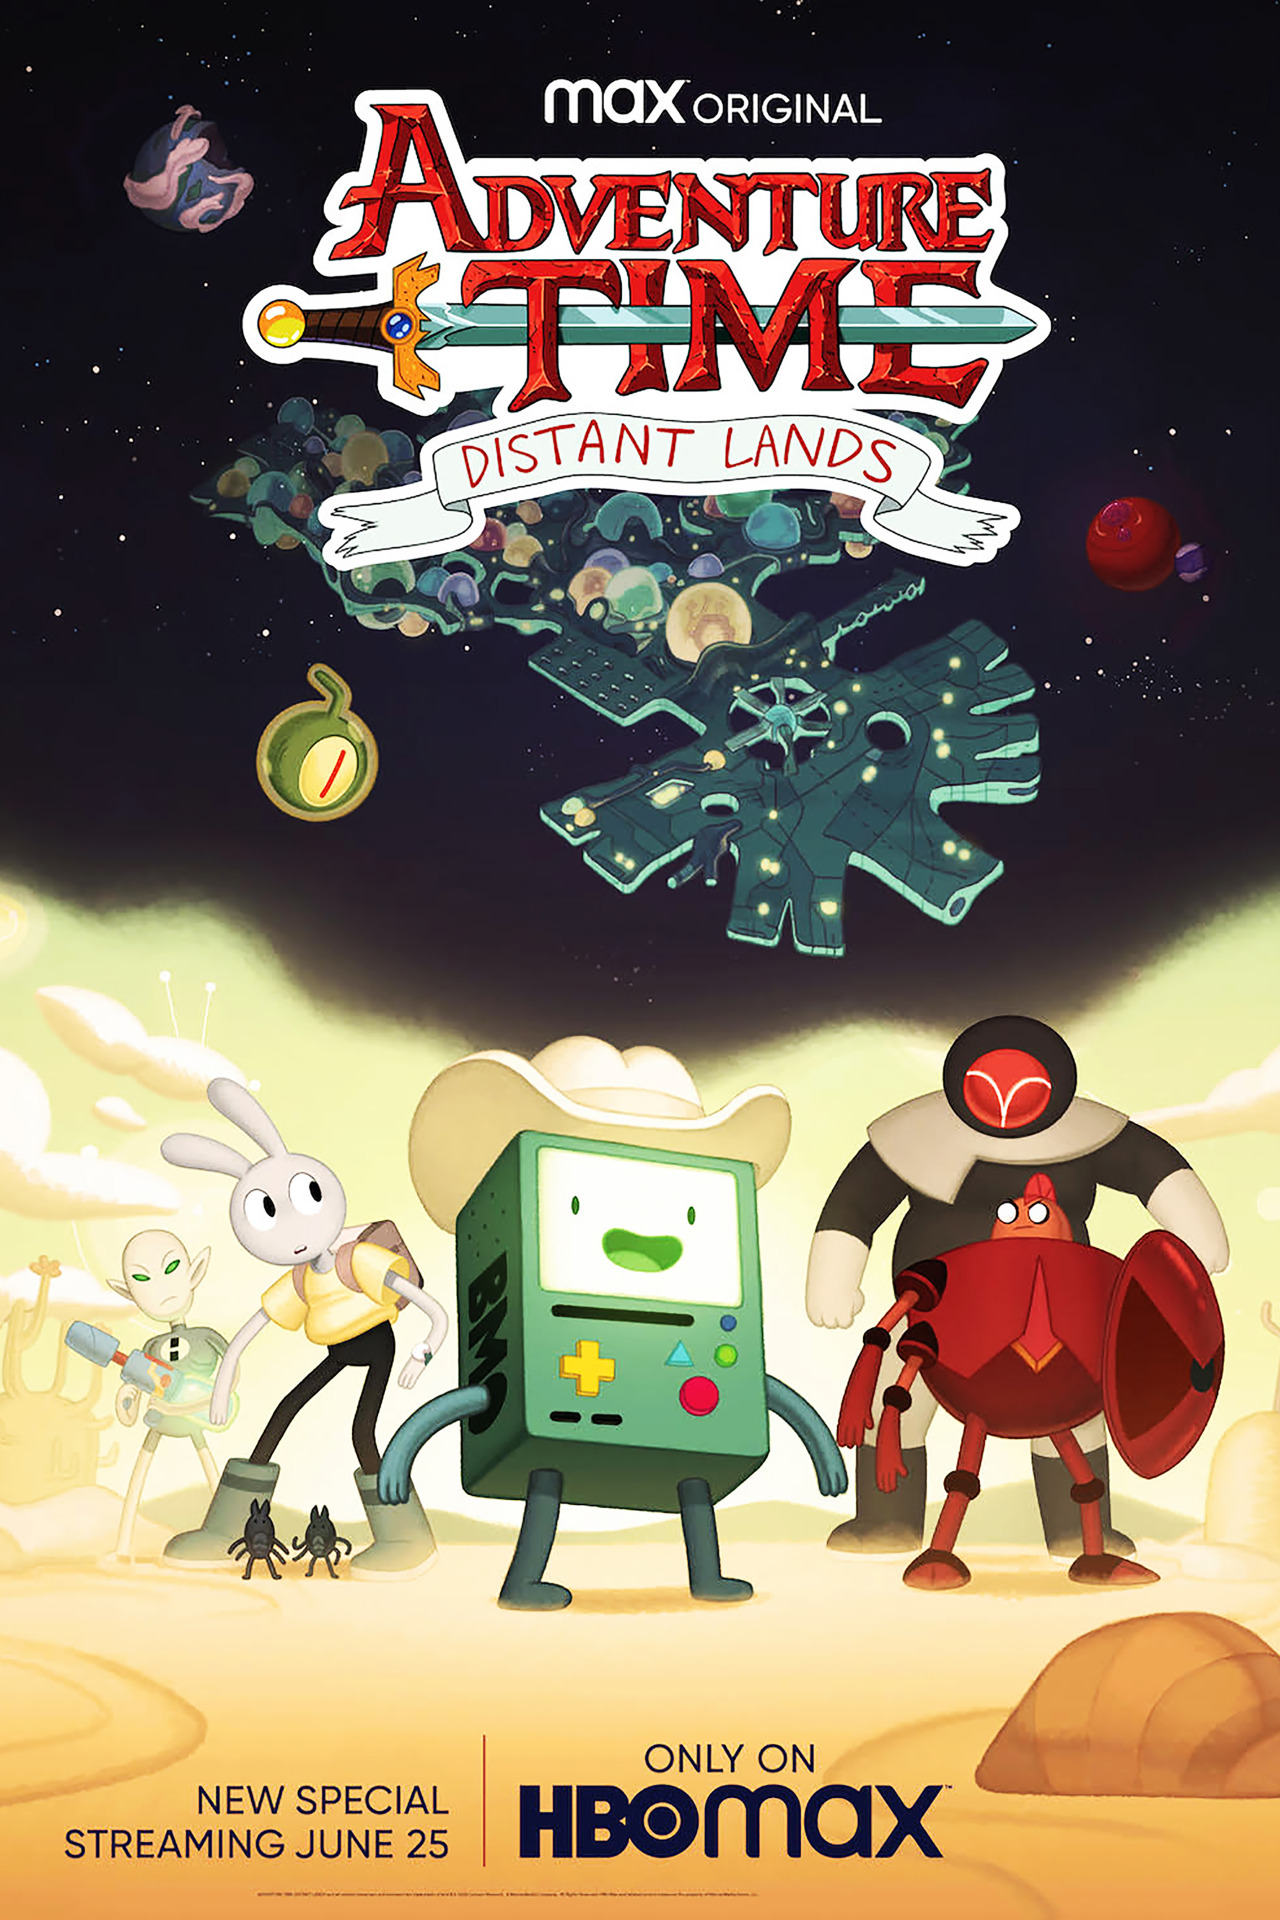 “New ‘Adventure Time’ Episode Debuts in June, Plus More HBO Max Premiere Dates“ “HBO Max…